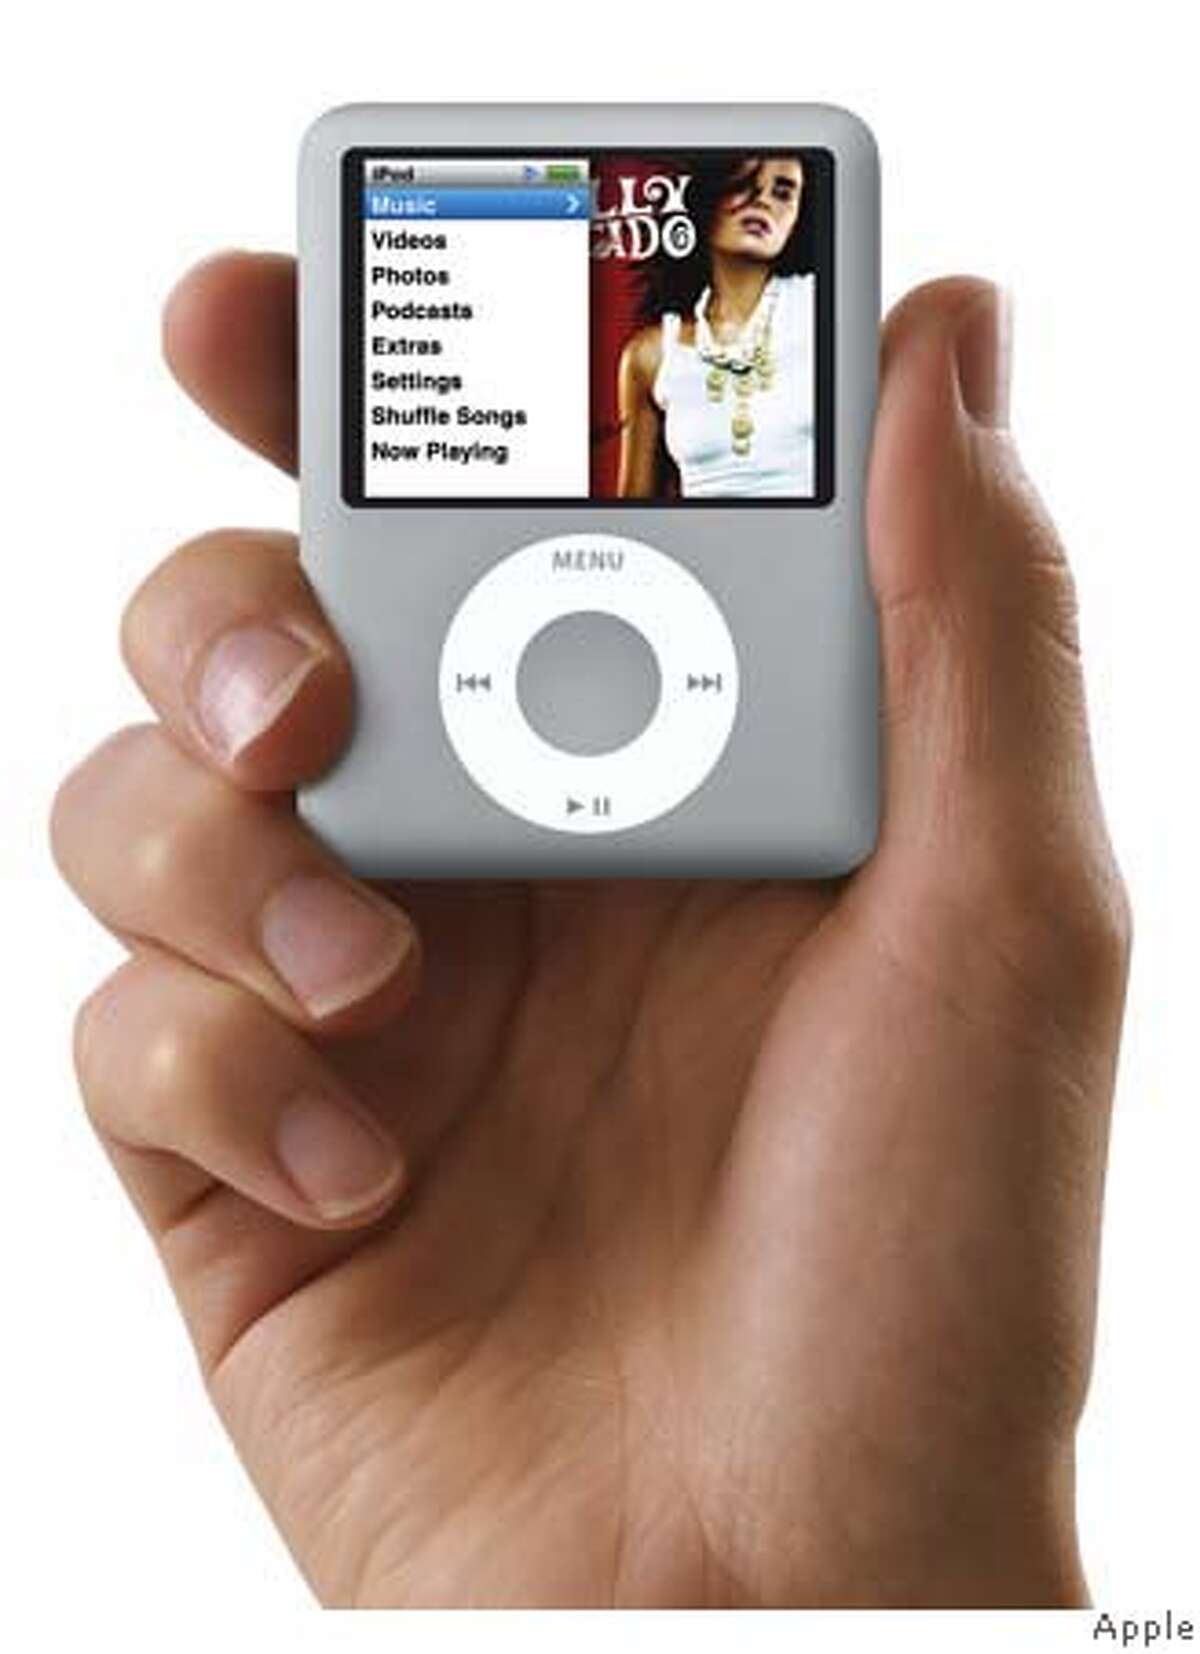 This photo provided by Apple shows the new Apple iPod Nano that was unveiled in San Francisco, Wednesday, Aug. 5, 2007. (AP Photo/Apple) Ran on: 09-06-2007 The updated iPod Nano is among Apples improvements. PHOTO PROVIDED BY APPLE. NO SALES. MAGAZINES OUT.